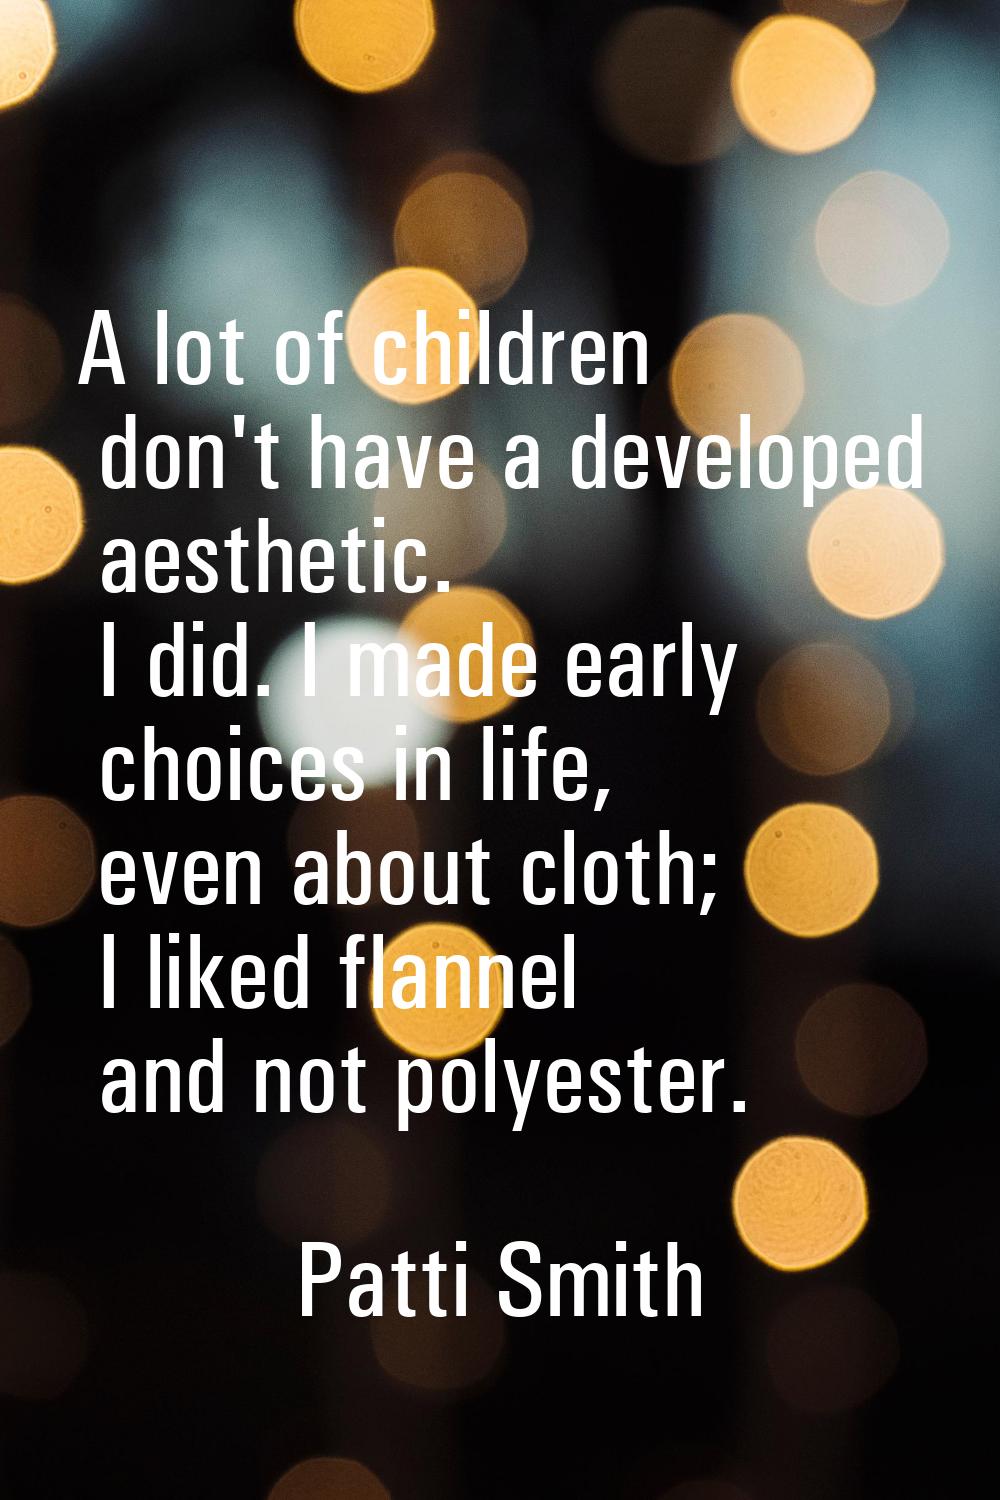 A lot of children don't have a developed aesthetic. I did. I made early choices in life, even about